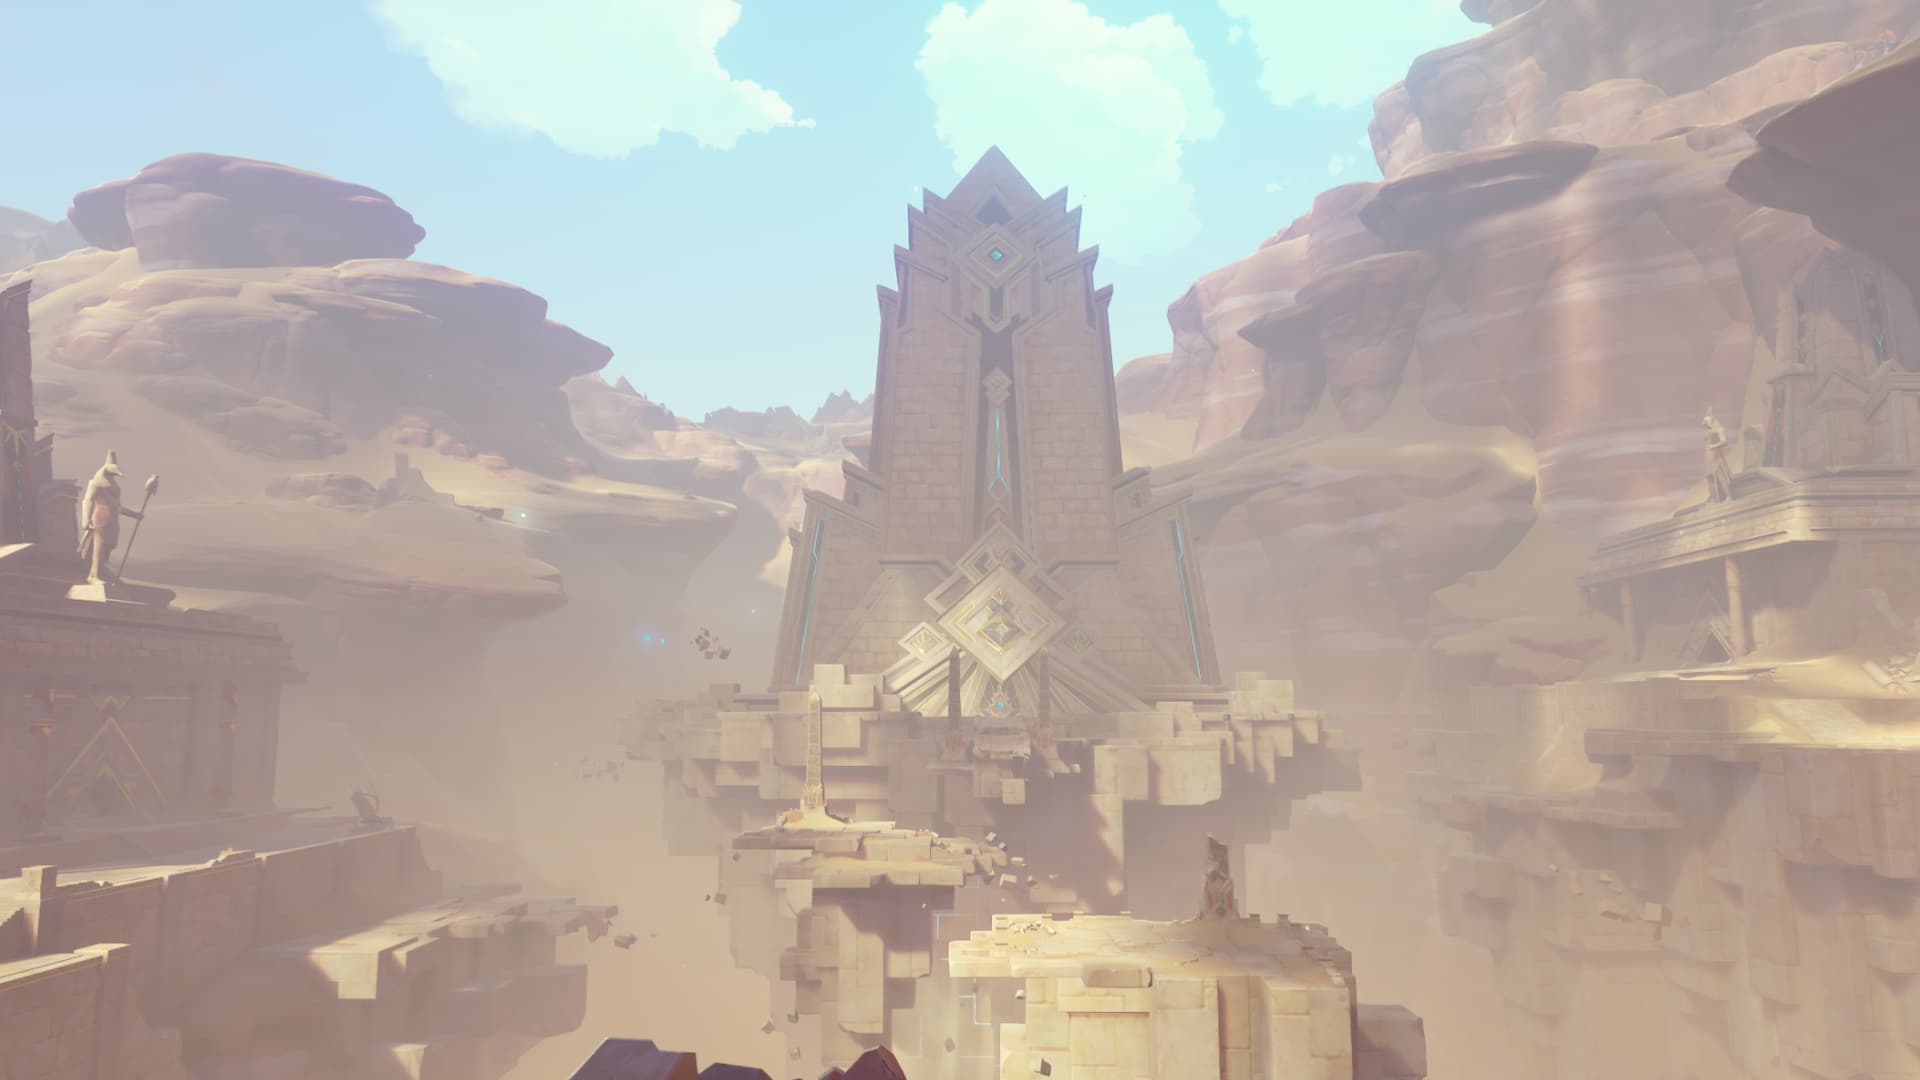 Genshin Impact 3.6 adds even more desert locations, according to leak: large stone structure in a desert